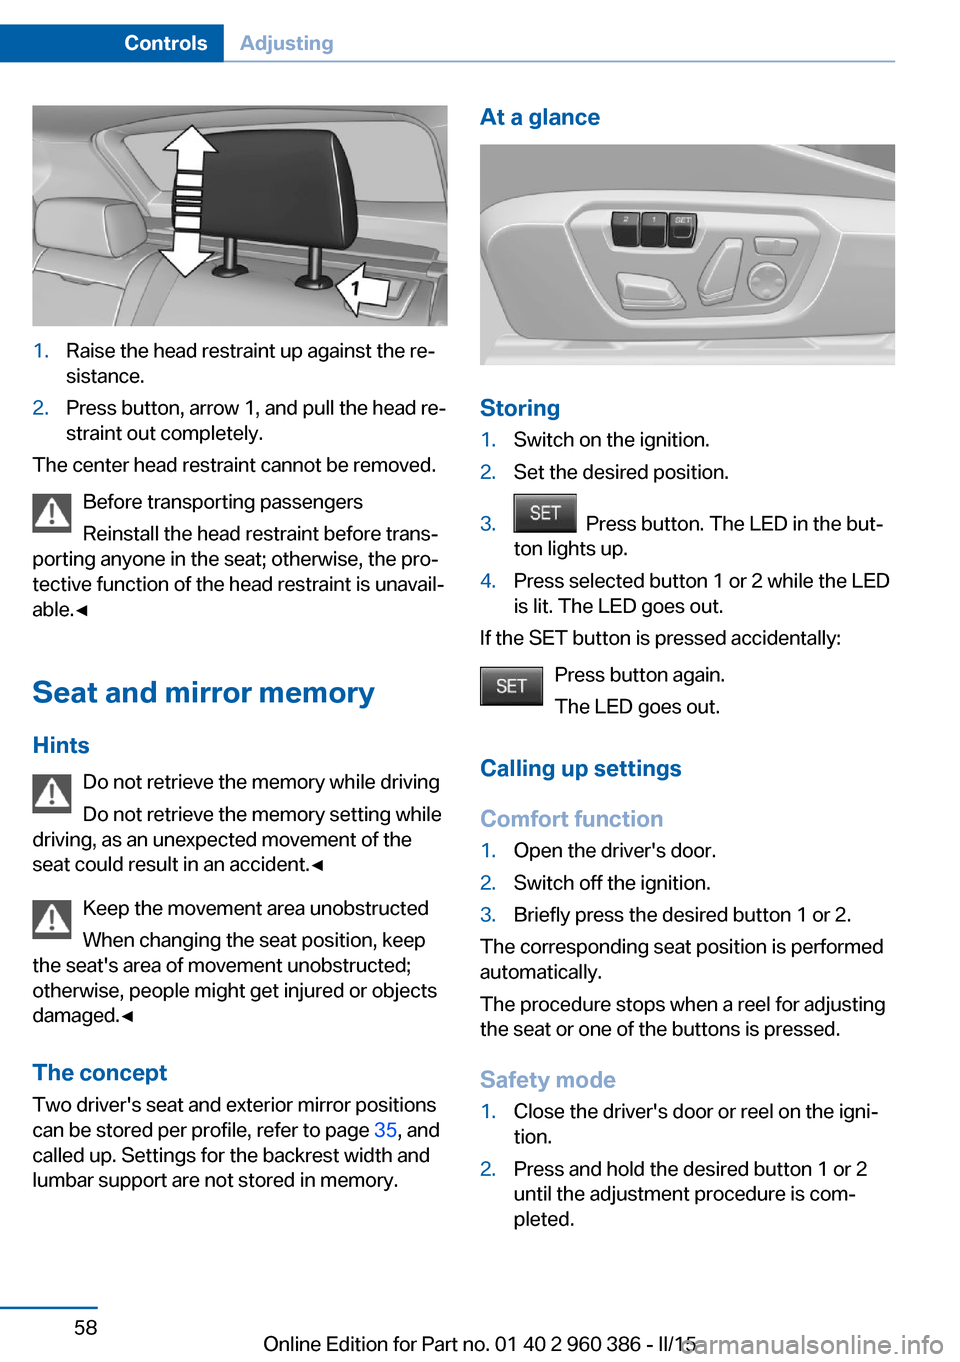 BMW X3 2015 F25 Owners Manual 1.Raise the head restraint up against the re‐
sistance.2.Press button, arrow 1, and pull the head re‐
straint out completely.
The center head restraint cannot be removed.
Before transporting passe